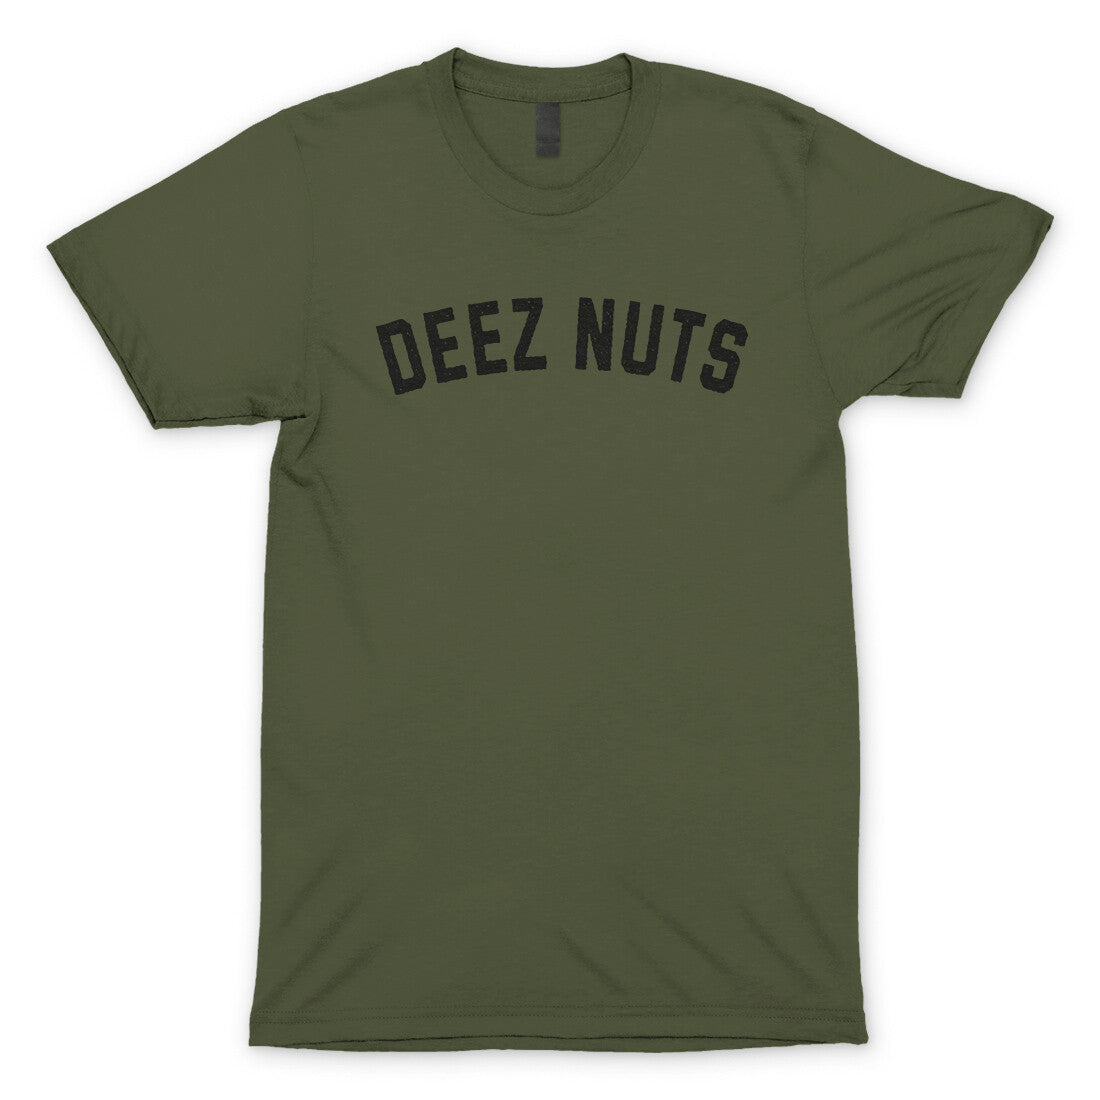 Deez Nuts in Military Green Color